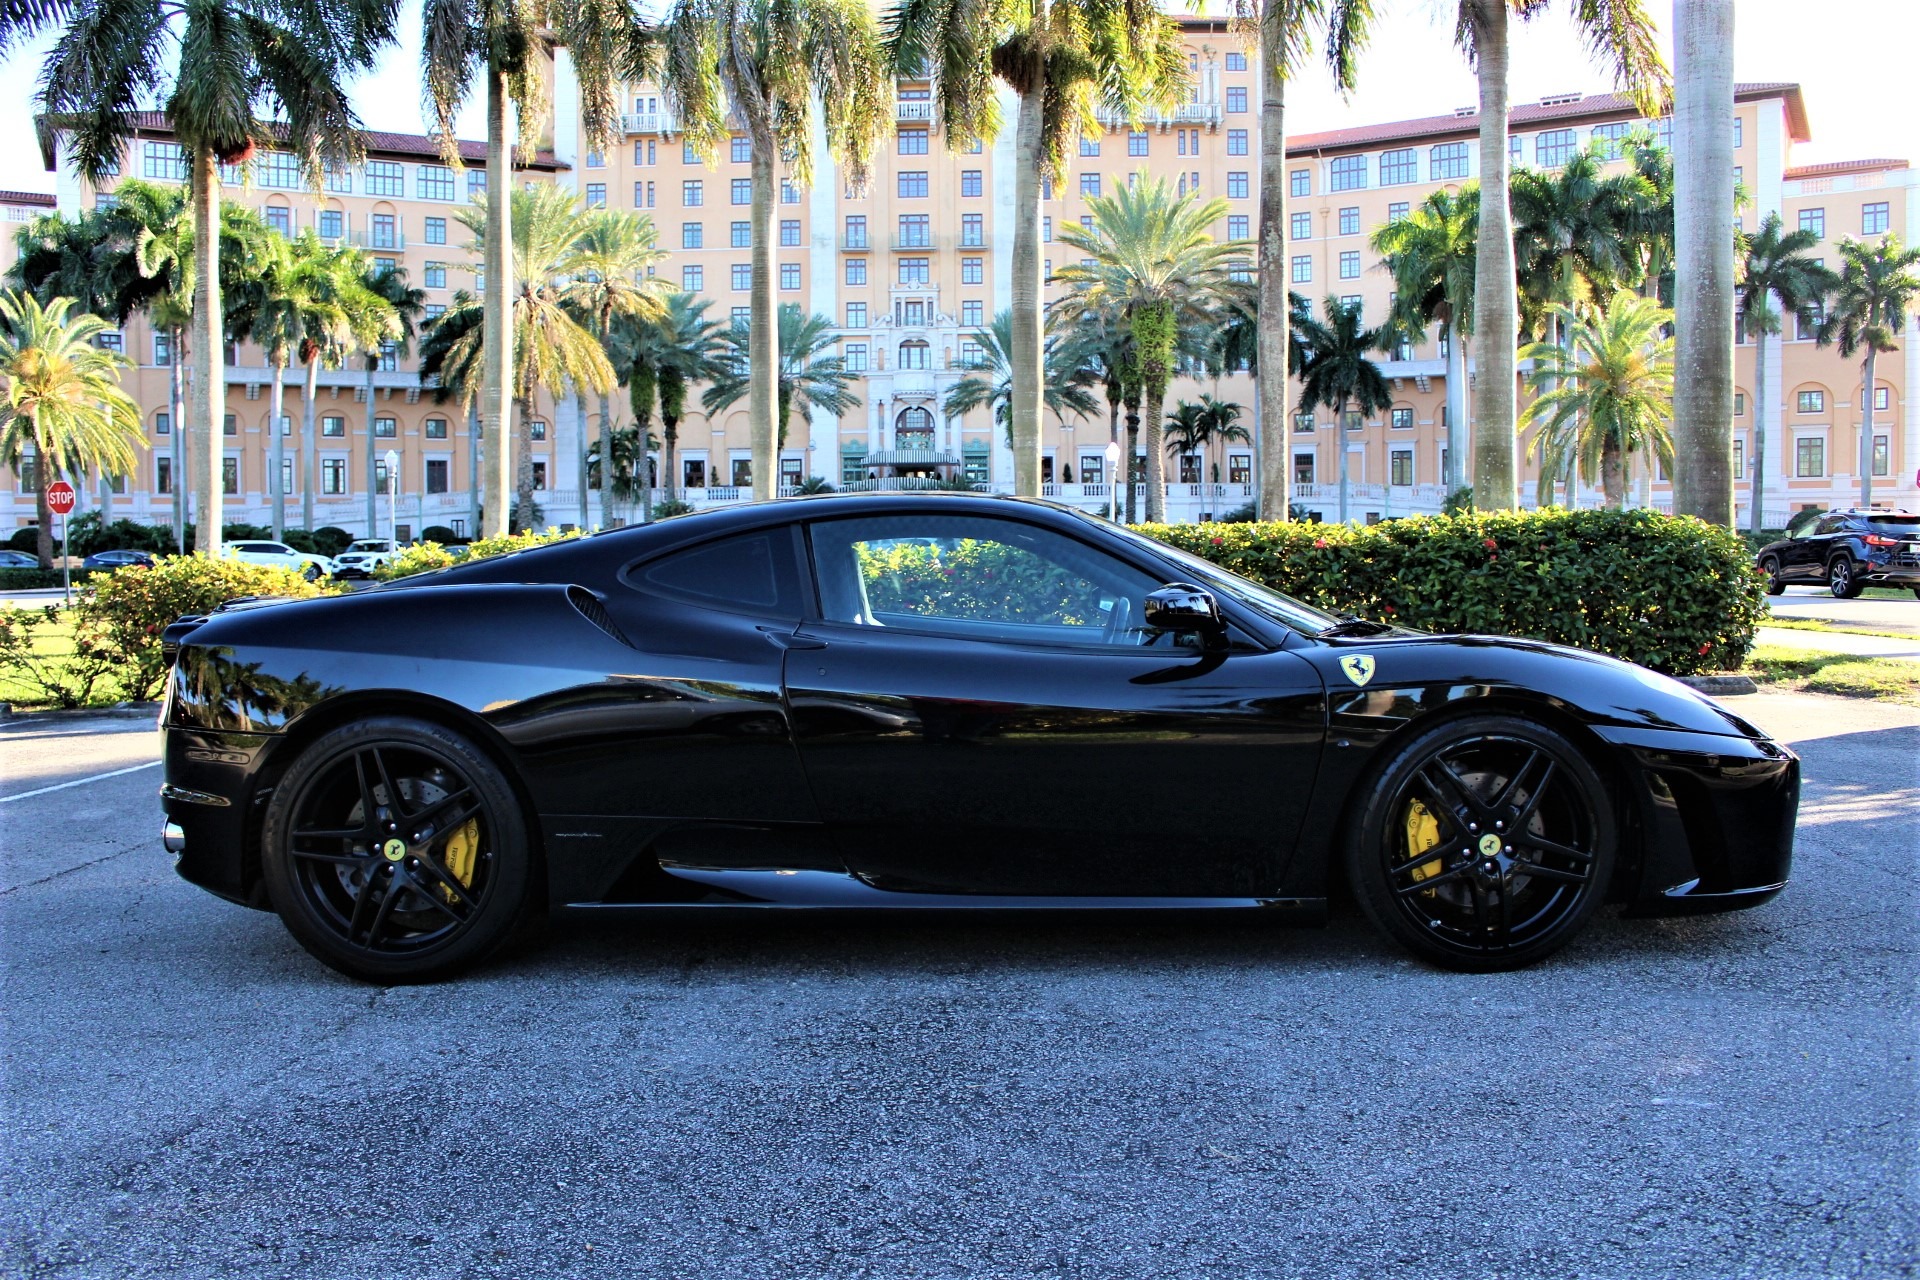 Used 2005 Ferrari F430 for sale Sold at The Gables Sports Cars in Miami FL 33146 3